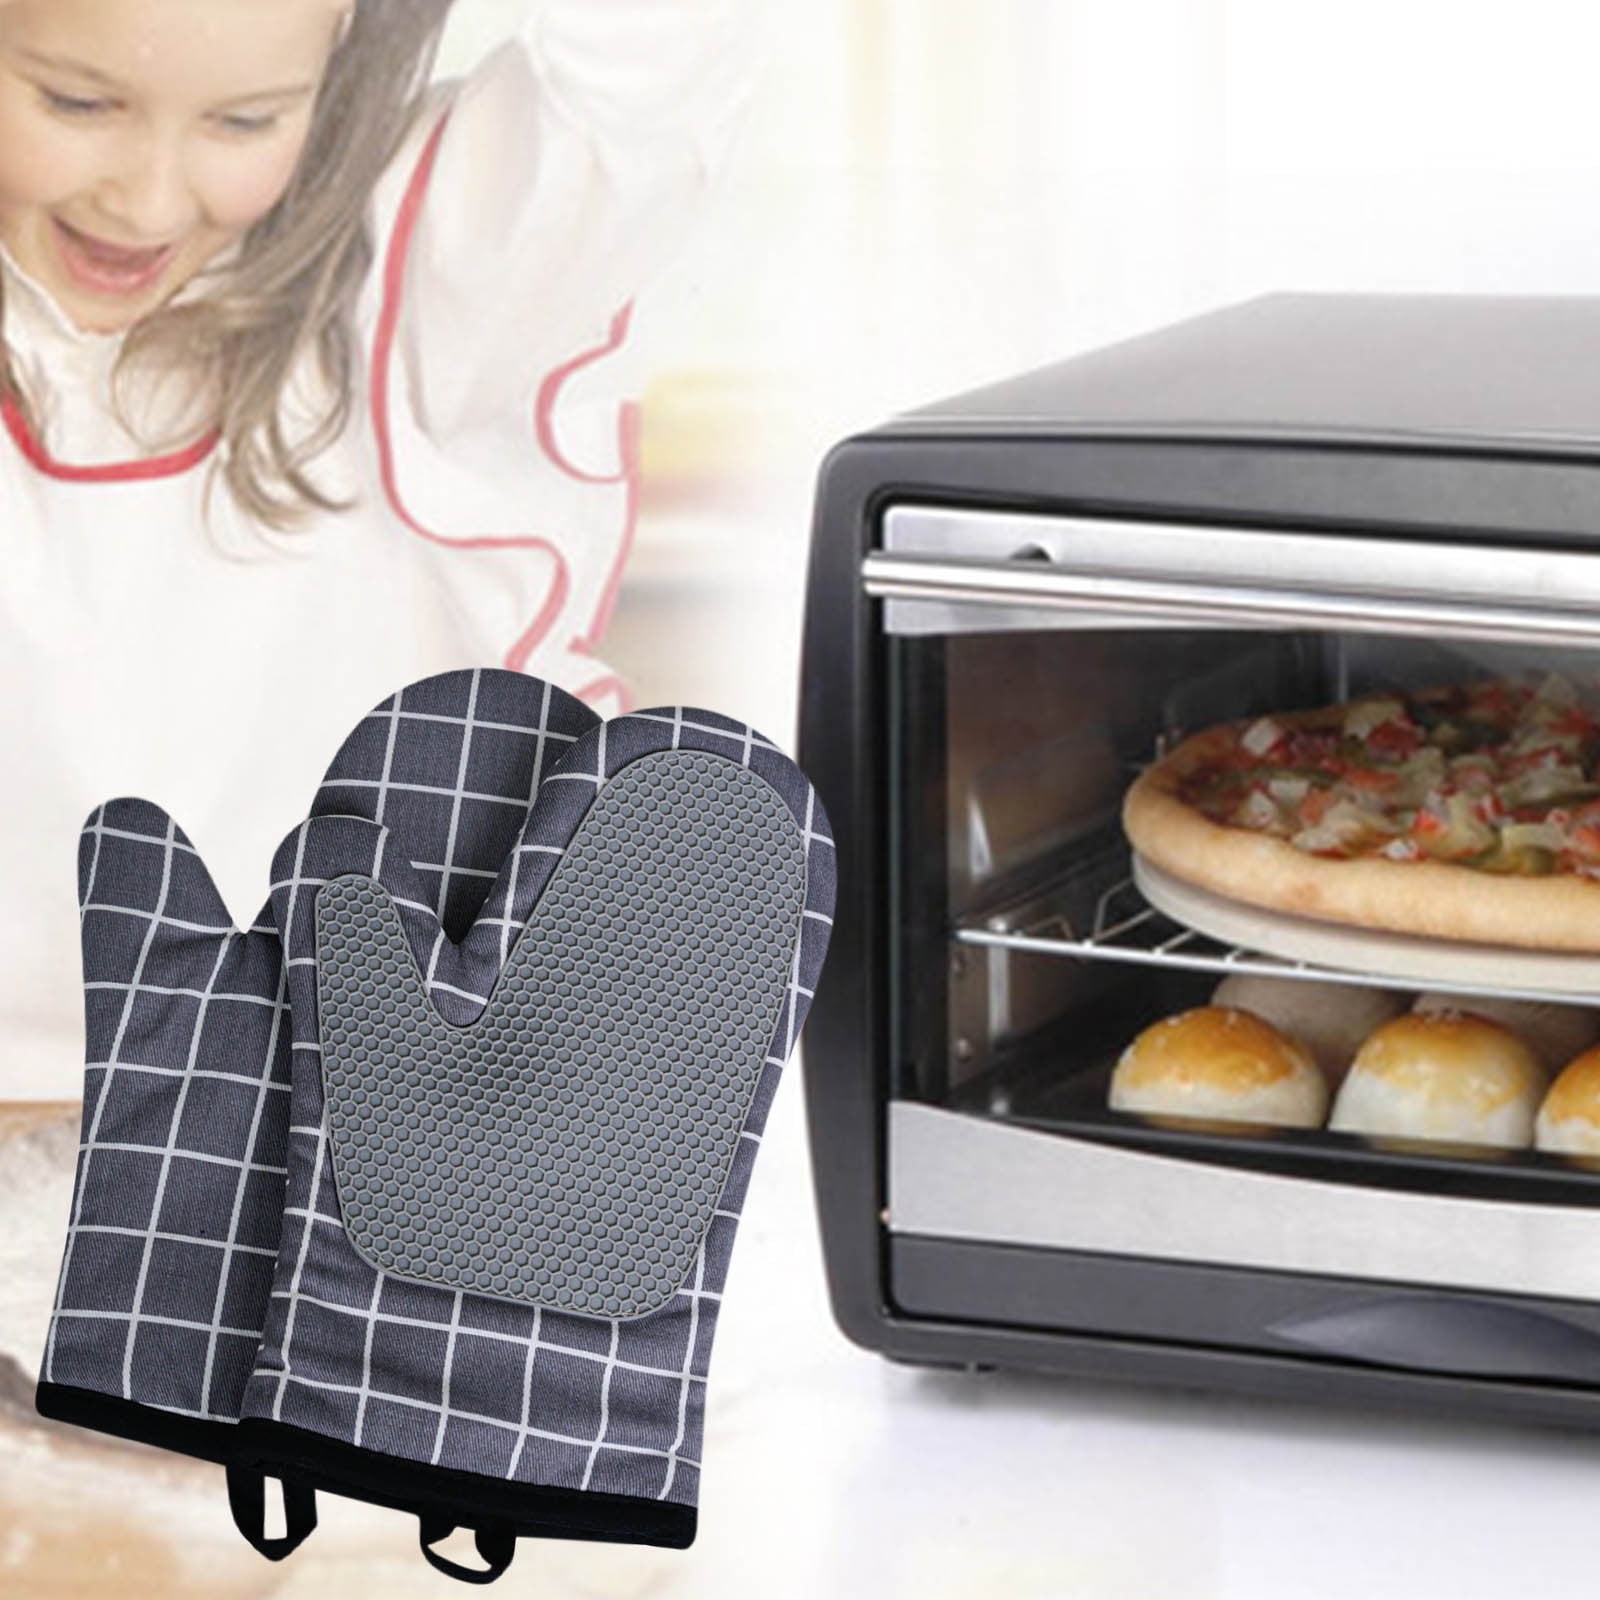 Gloves Oven Mitts Kids Kitchen Microwave Baking Cooking Heat